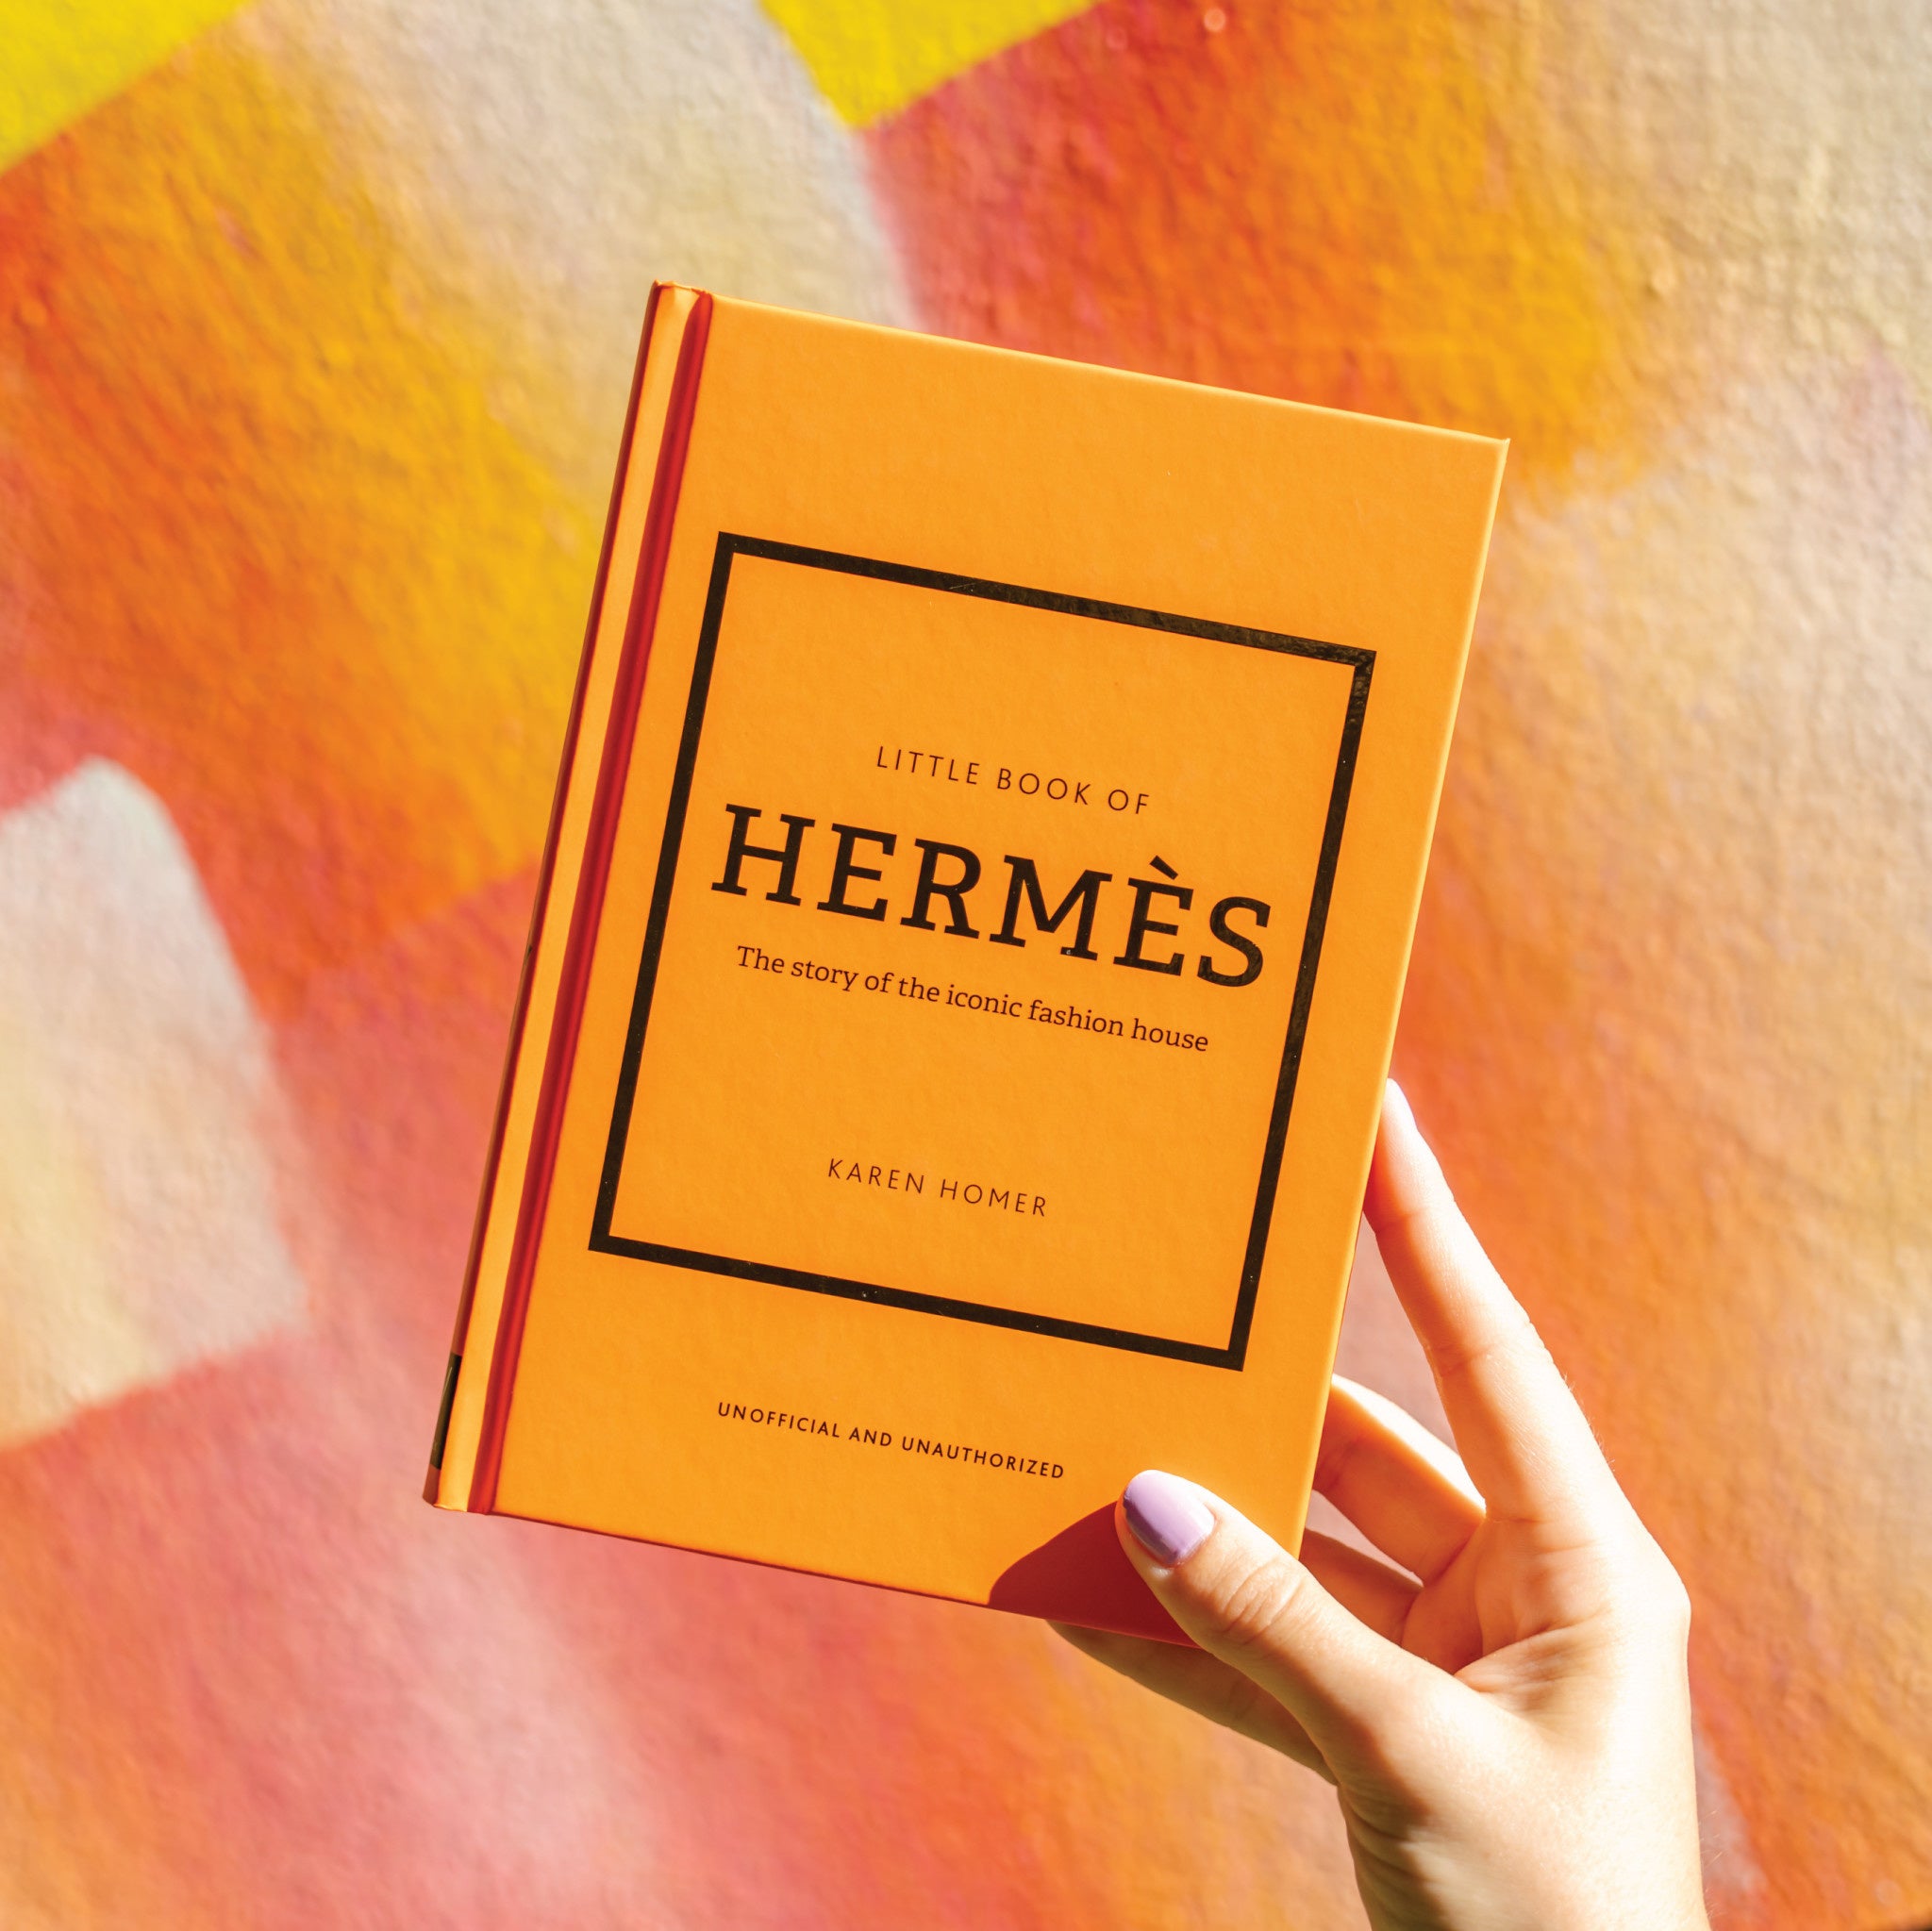 Little Book of Hermès: The Story of the Iconic Fashion House - Wynwood Walls Shop